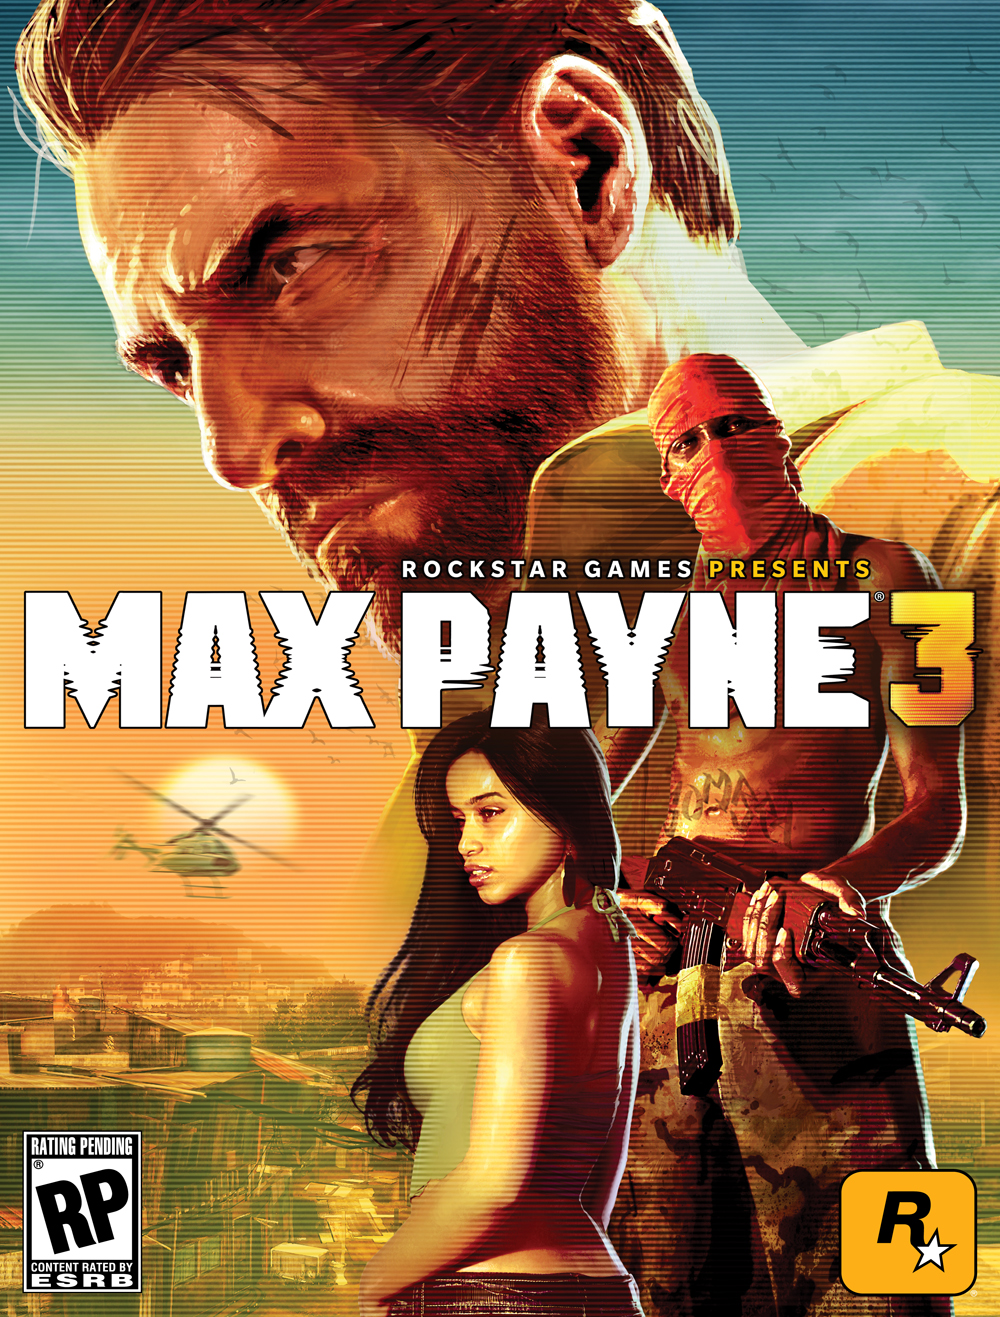 max payne 3 console commands